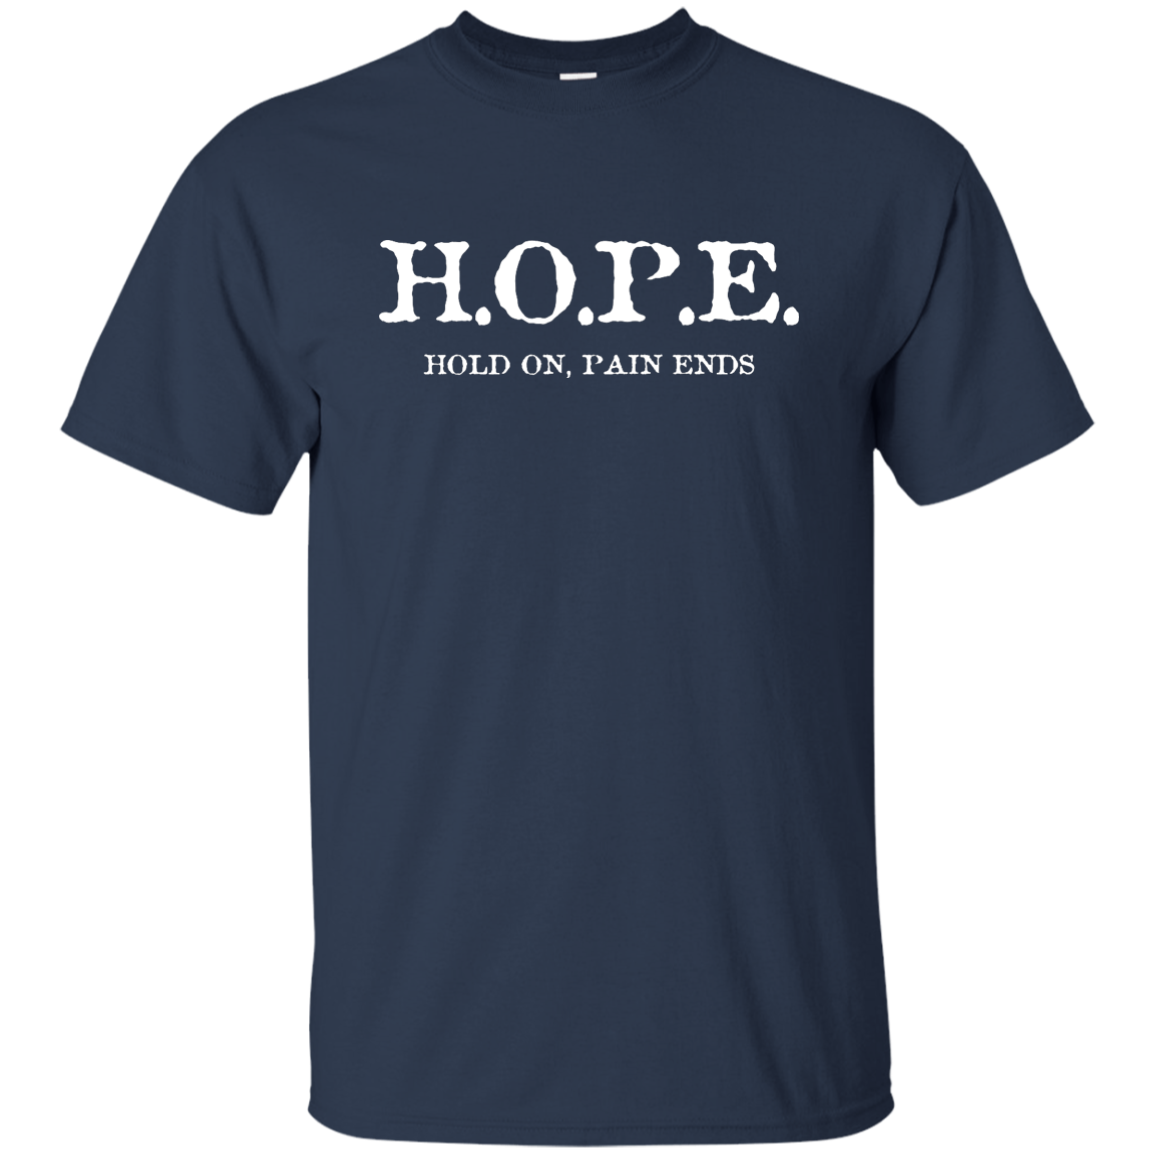 HOPE - Hold On, Pain Ends